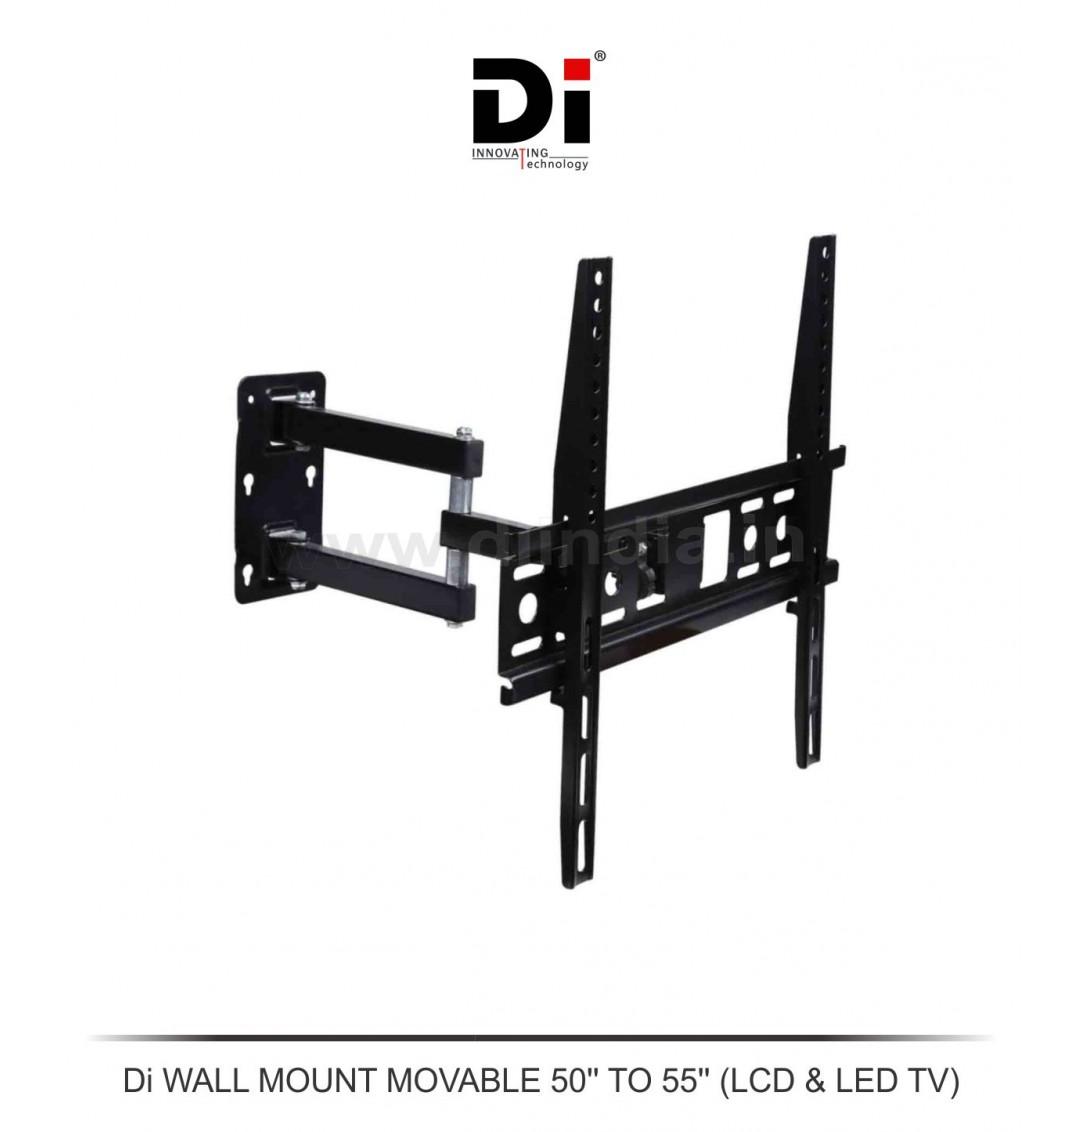 WALL MOUNT MOVABLE 50'' TO 55'' (LCD & LED TV)